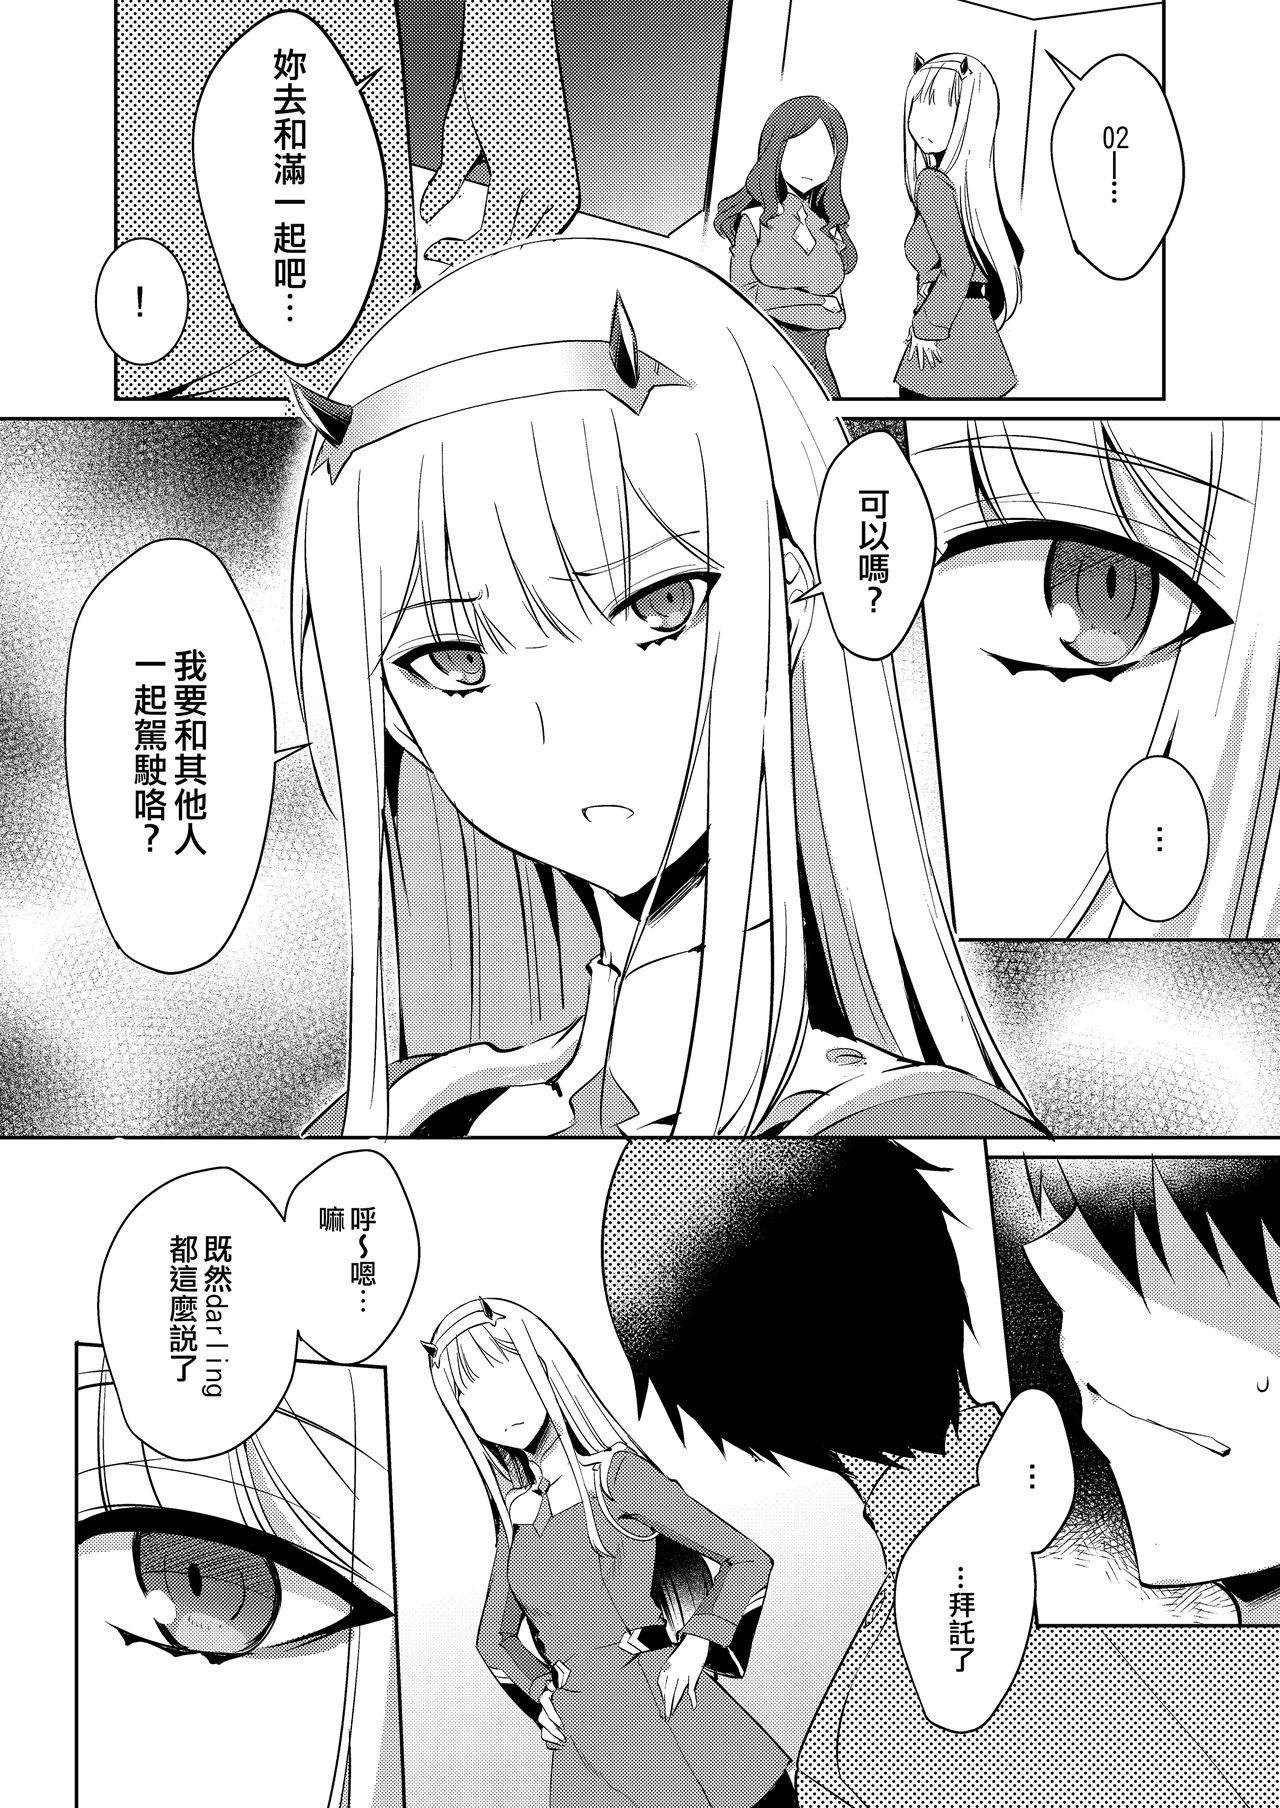 Nena Mitsuru in the Zero Two - Darling in the franxx Best Blowjob Ever - Page 5